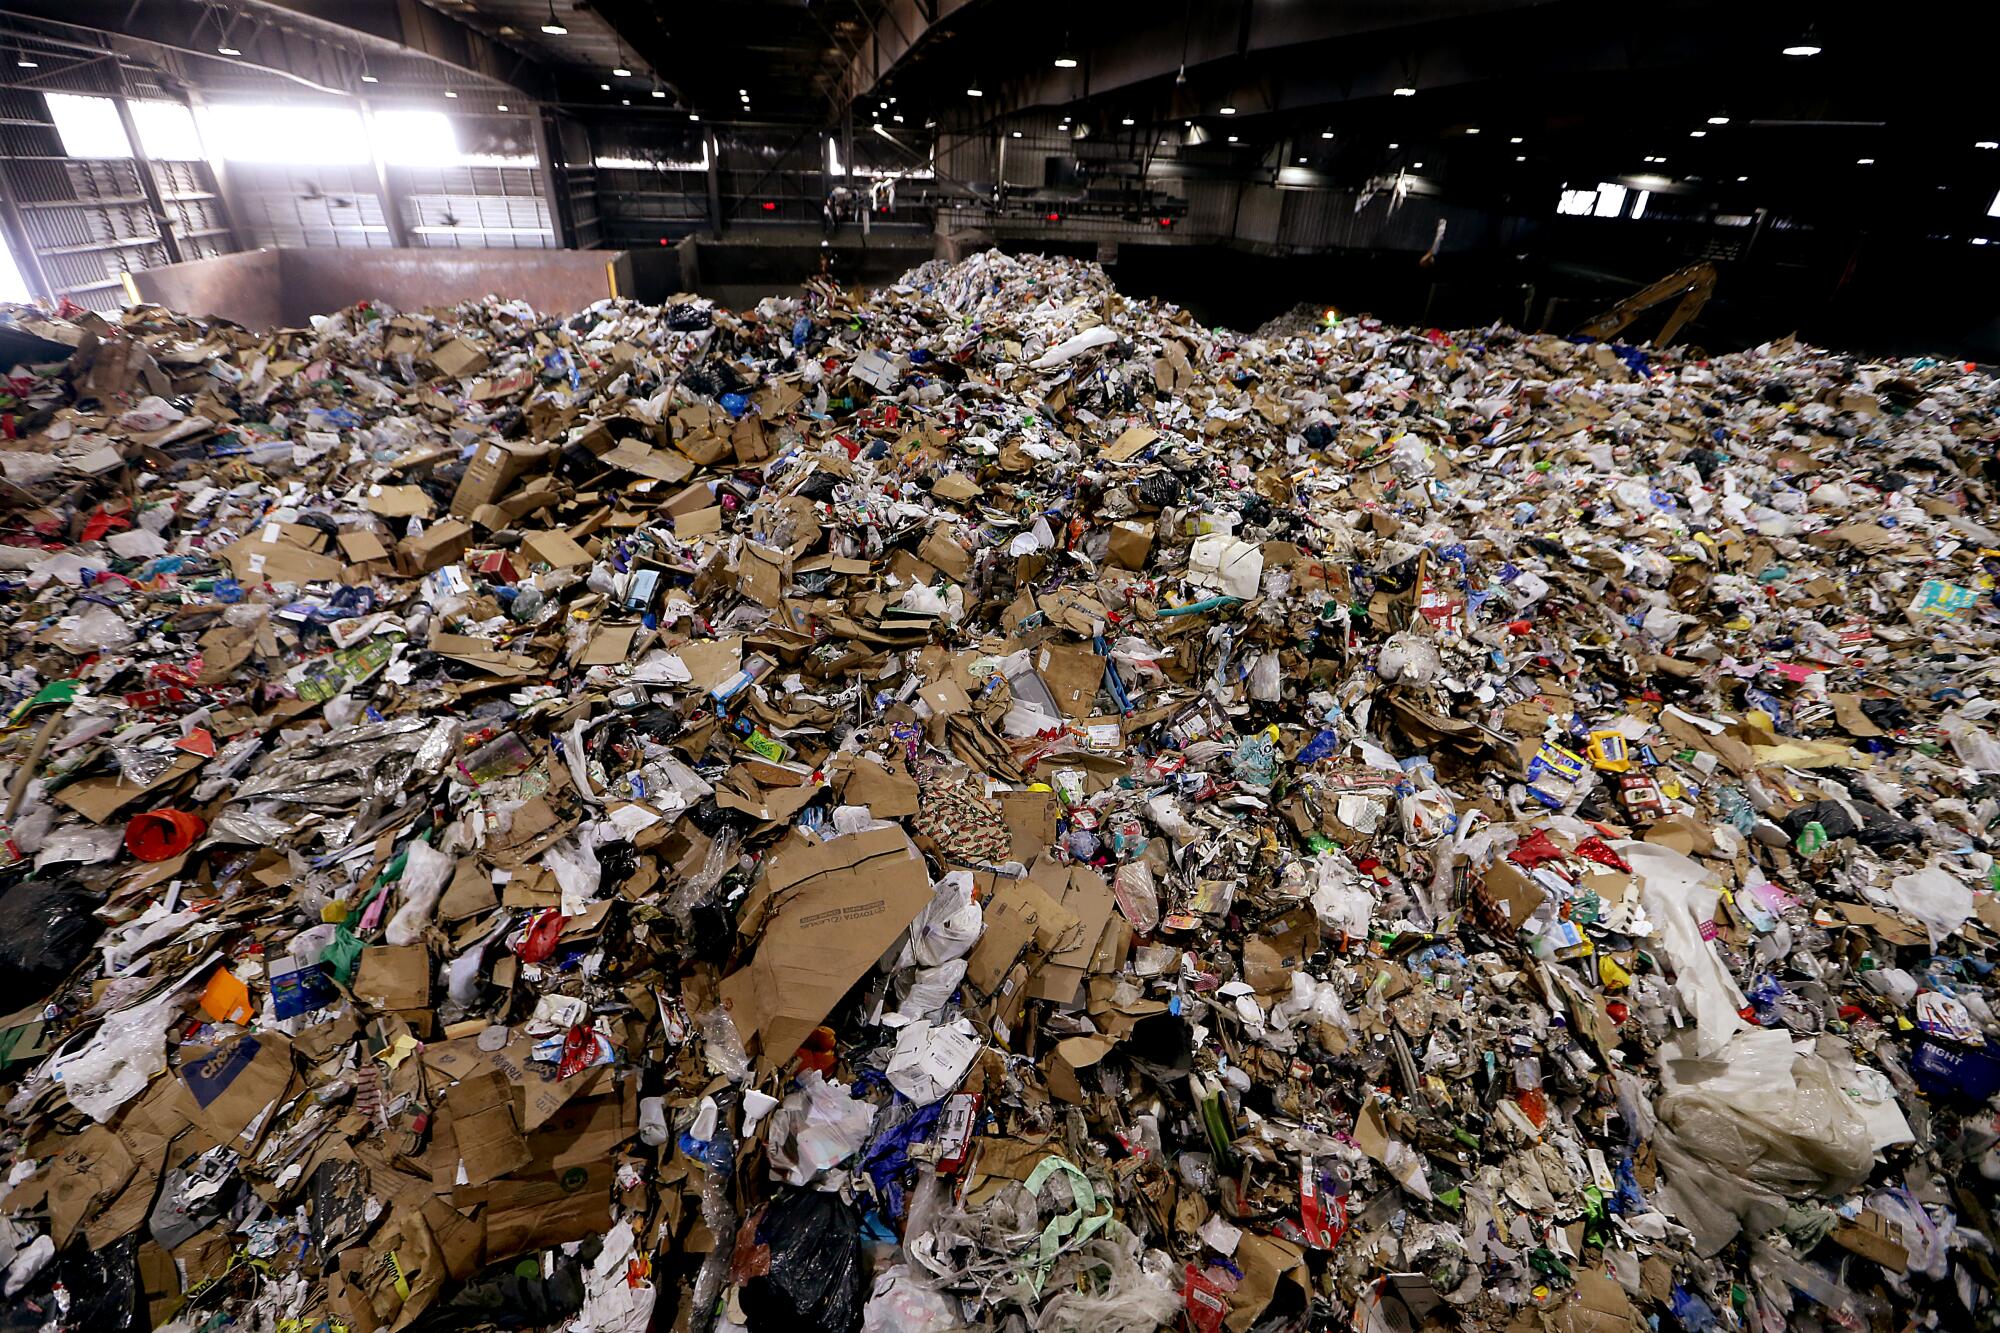 A huge mountain of trash is piled up inside the cavernous Athens material recovery facility in Sun Valley.